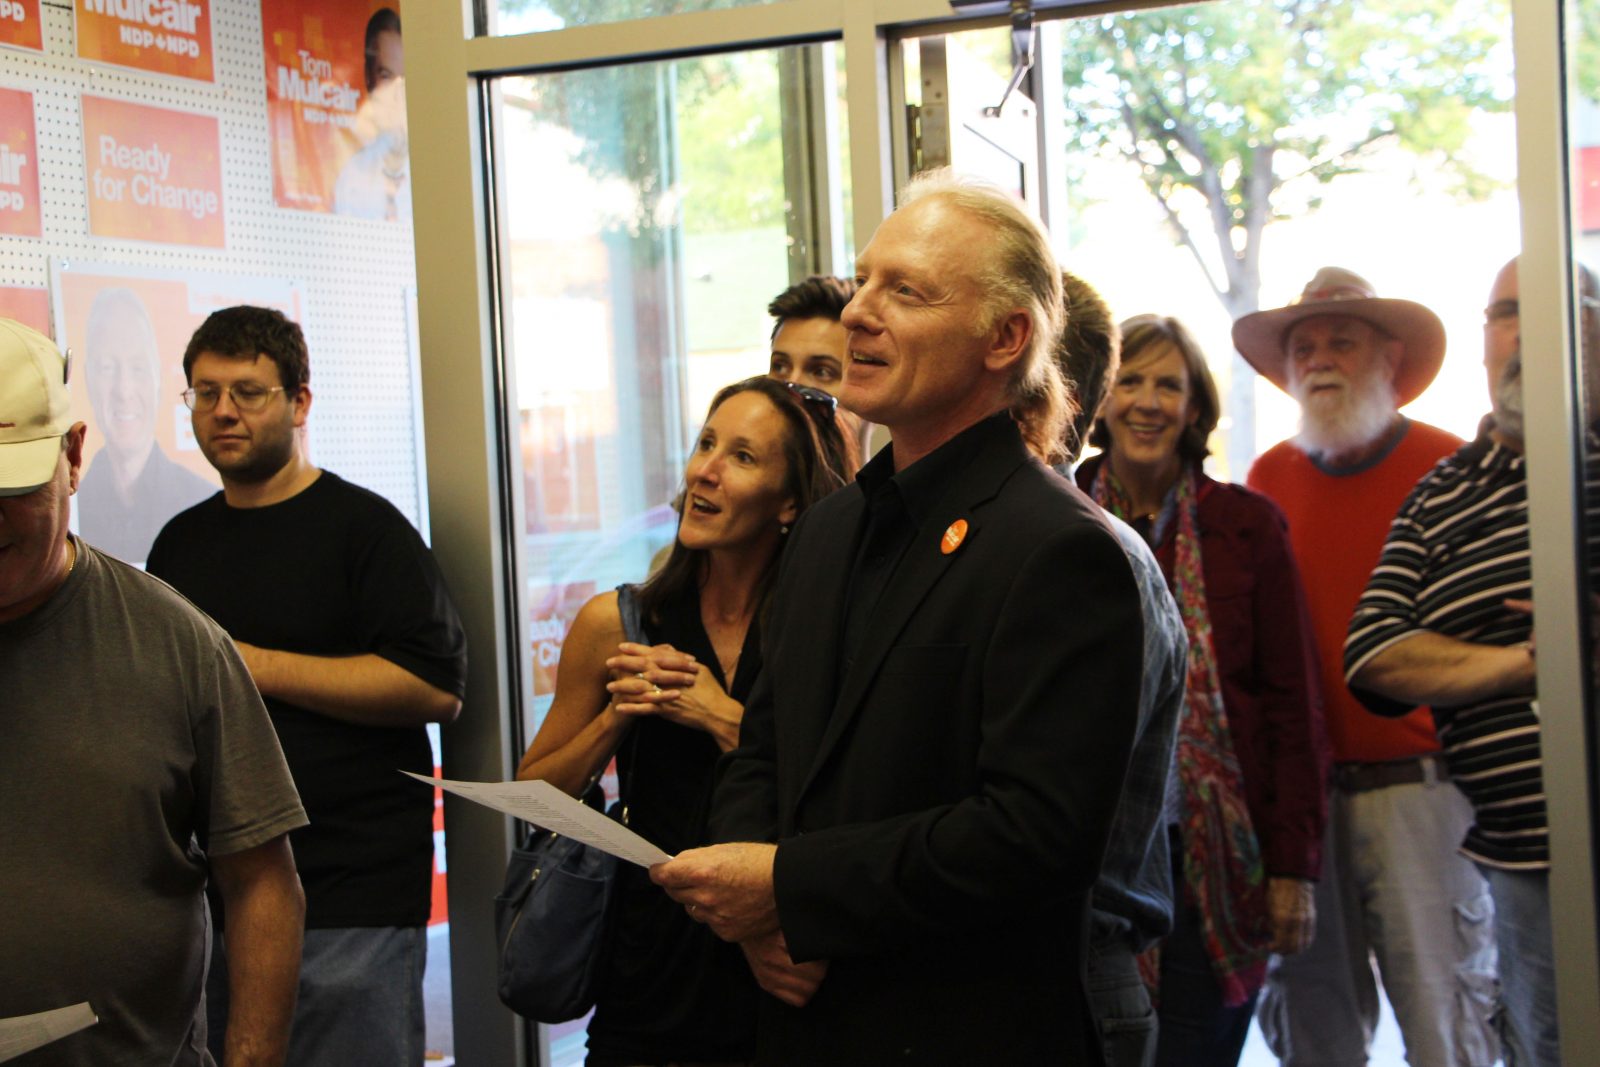 NDP candidate opens campaign office with ‘Harperman’ sing-along